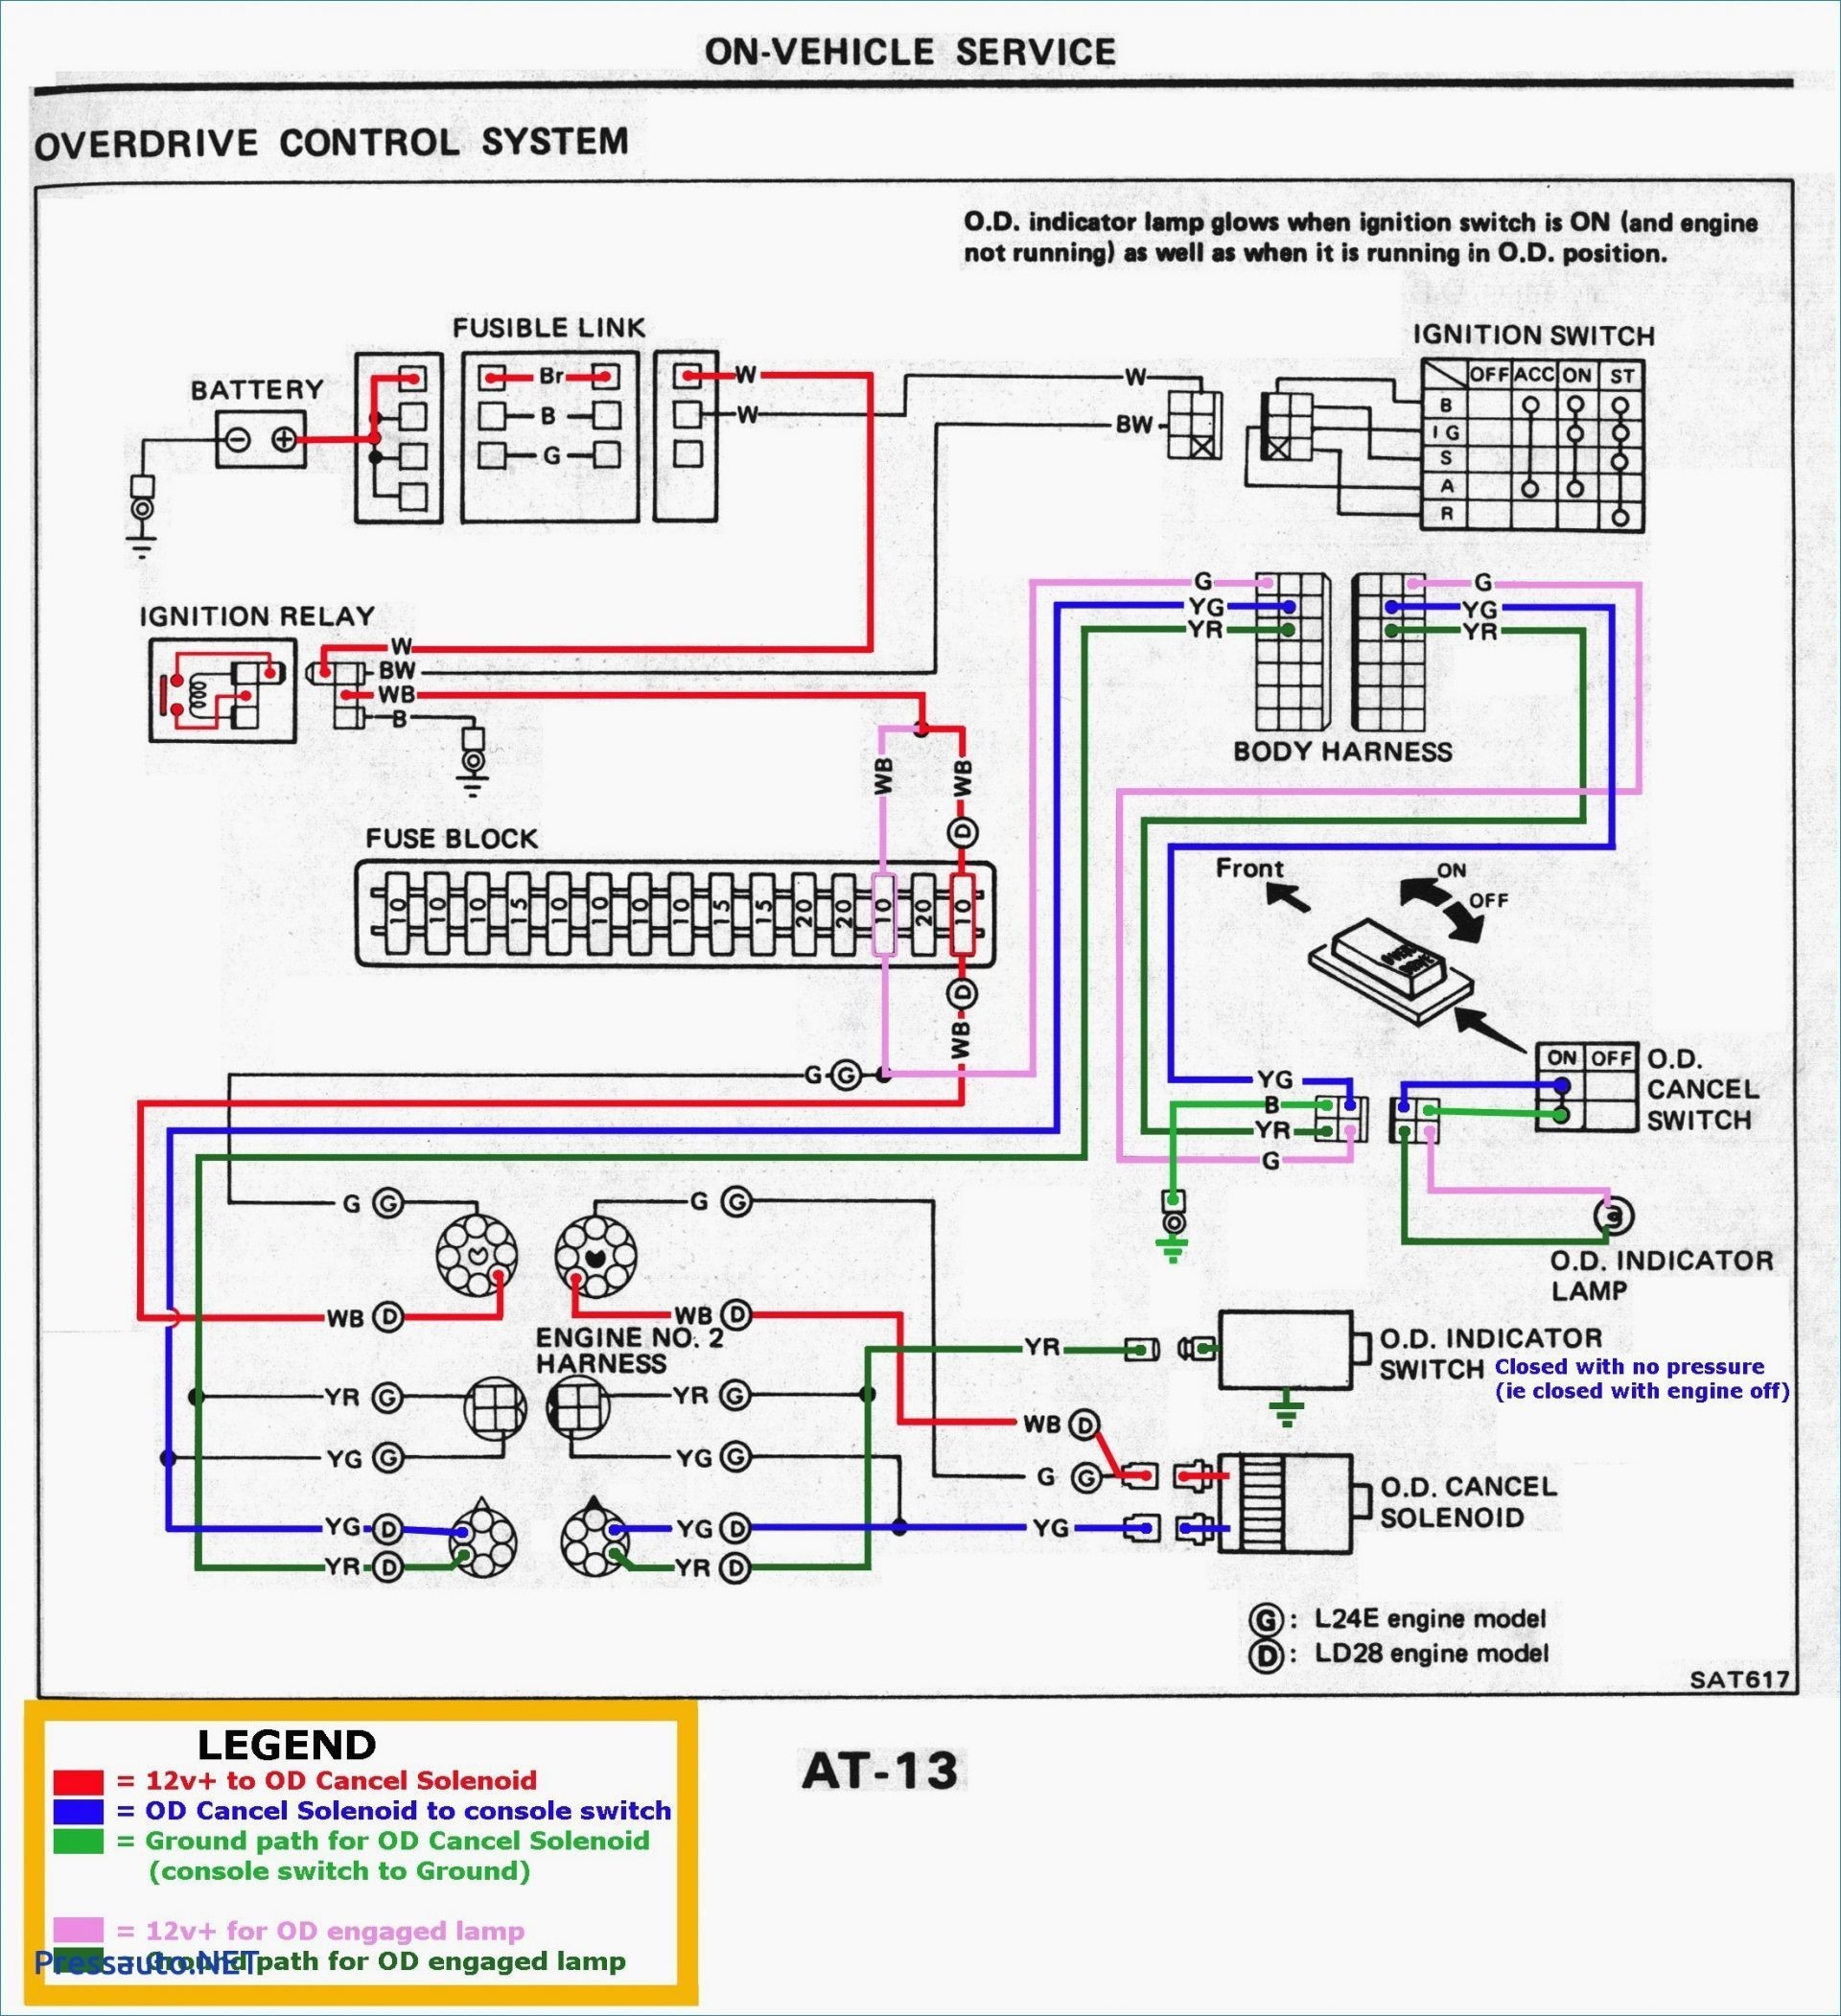 Automotive Wiring Diagram Colours Awesome Wiring Diagram Color Codes Automotive Best Car Lamp Wiring Diagram